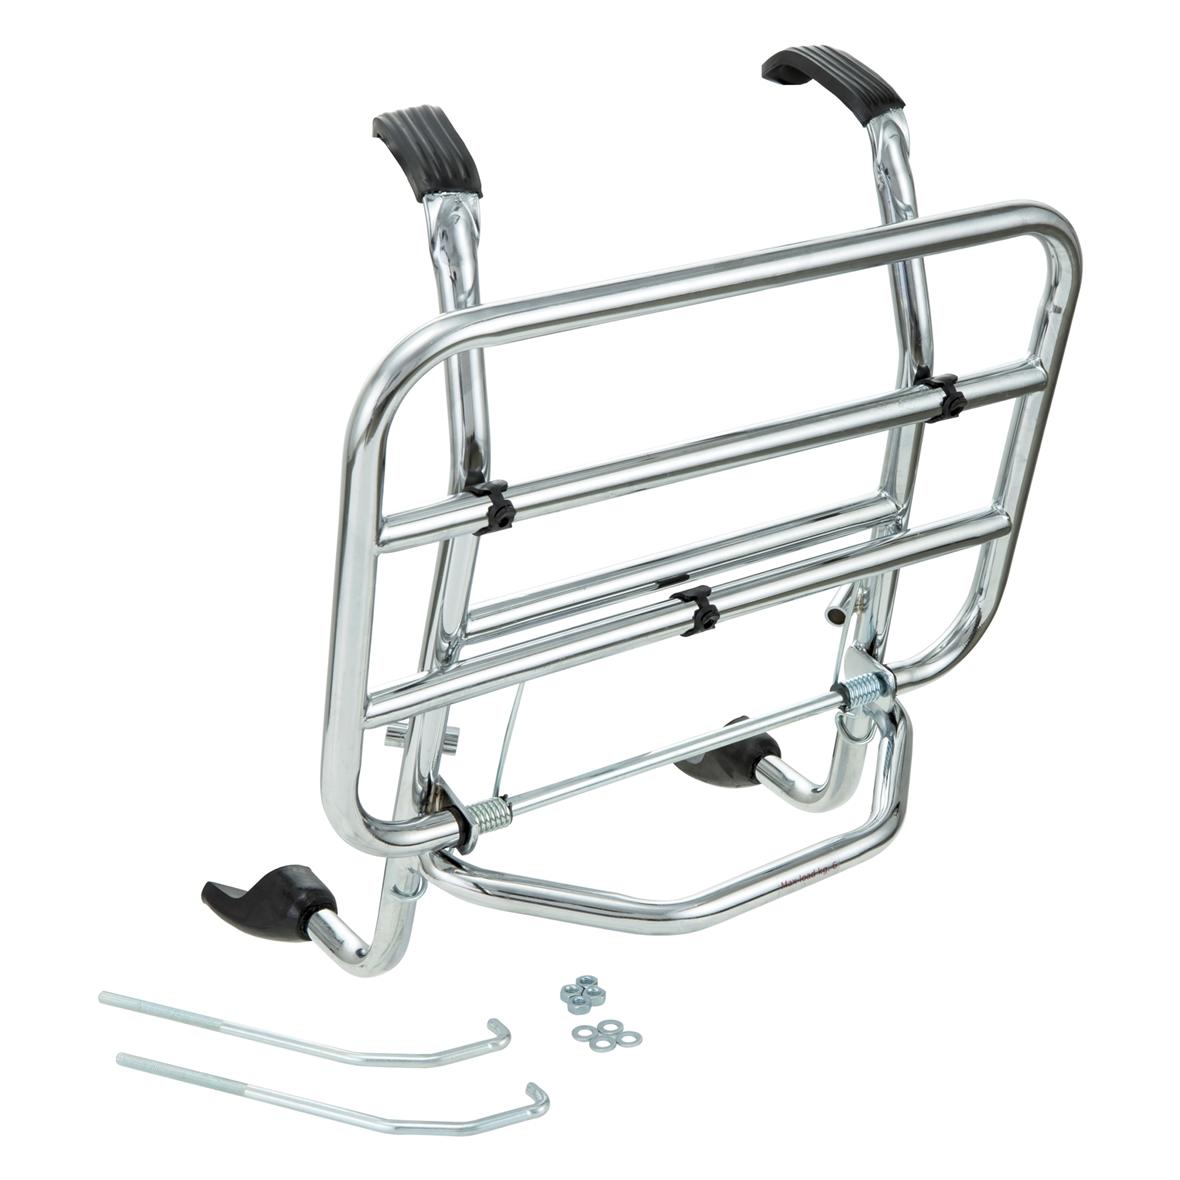 Chrome front luggage rack for Vespa Cosa 1-2 125-200